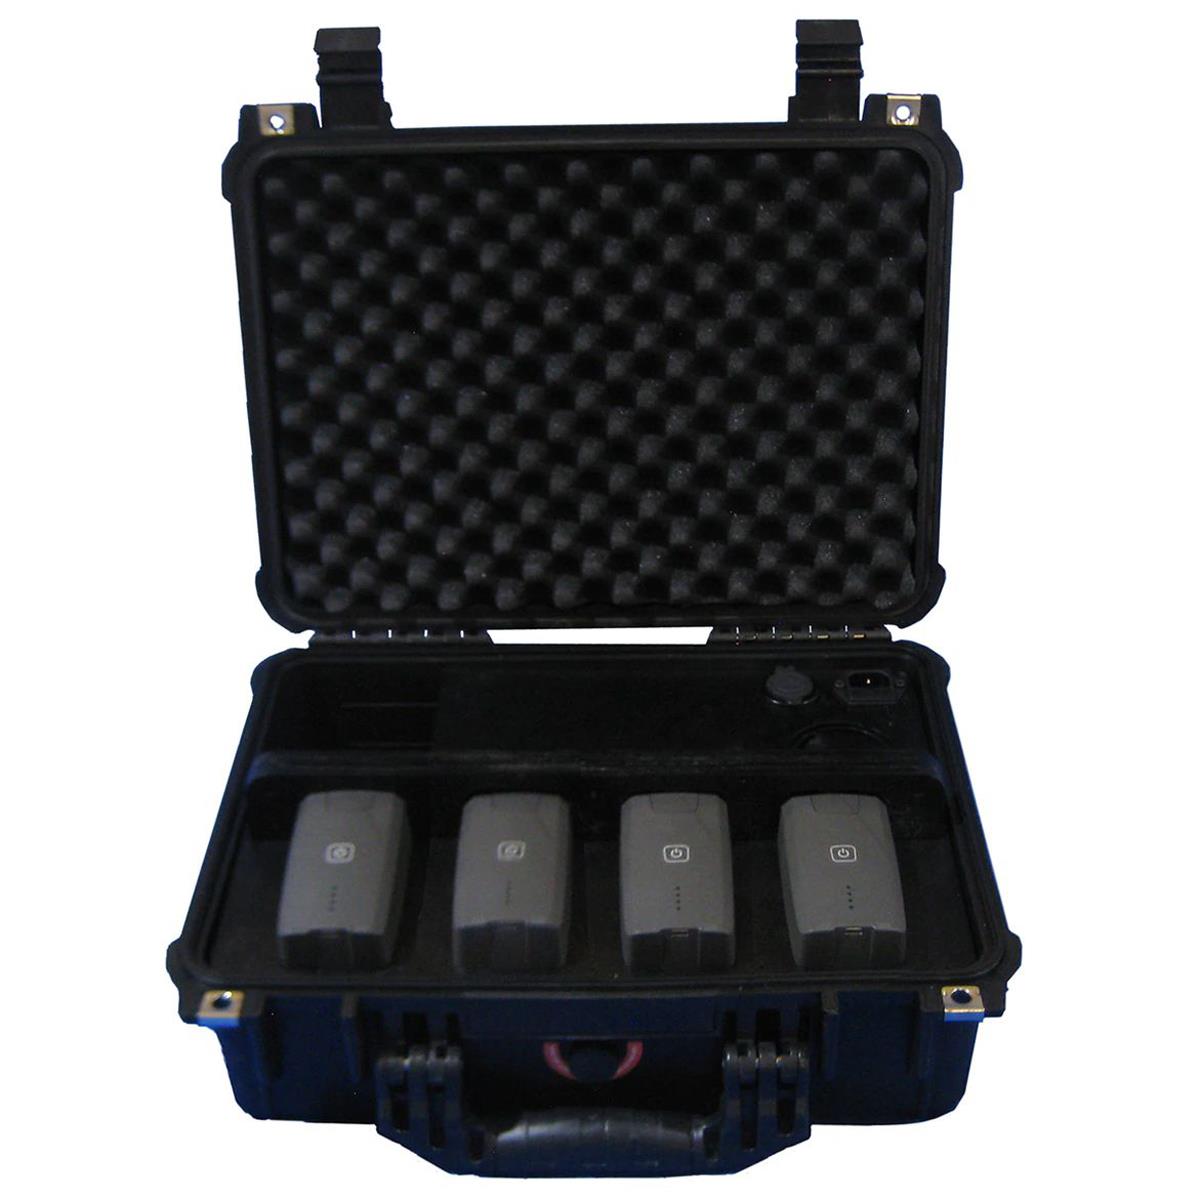 Image of Colorado Drone Chargers PRCS Elite Charging System for Parrot Anafi USA